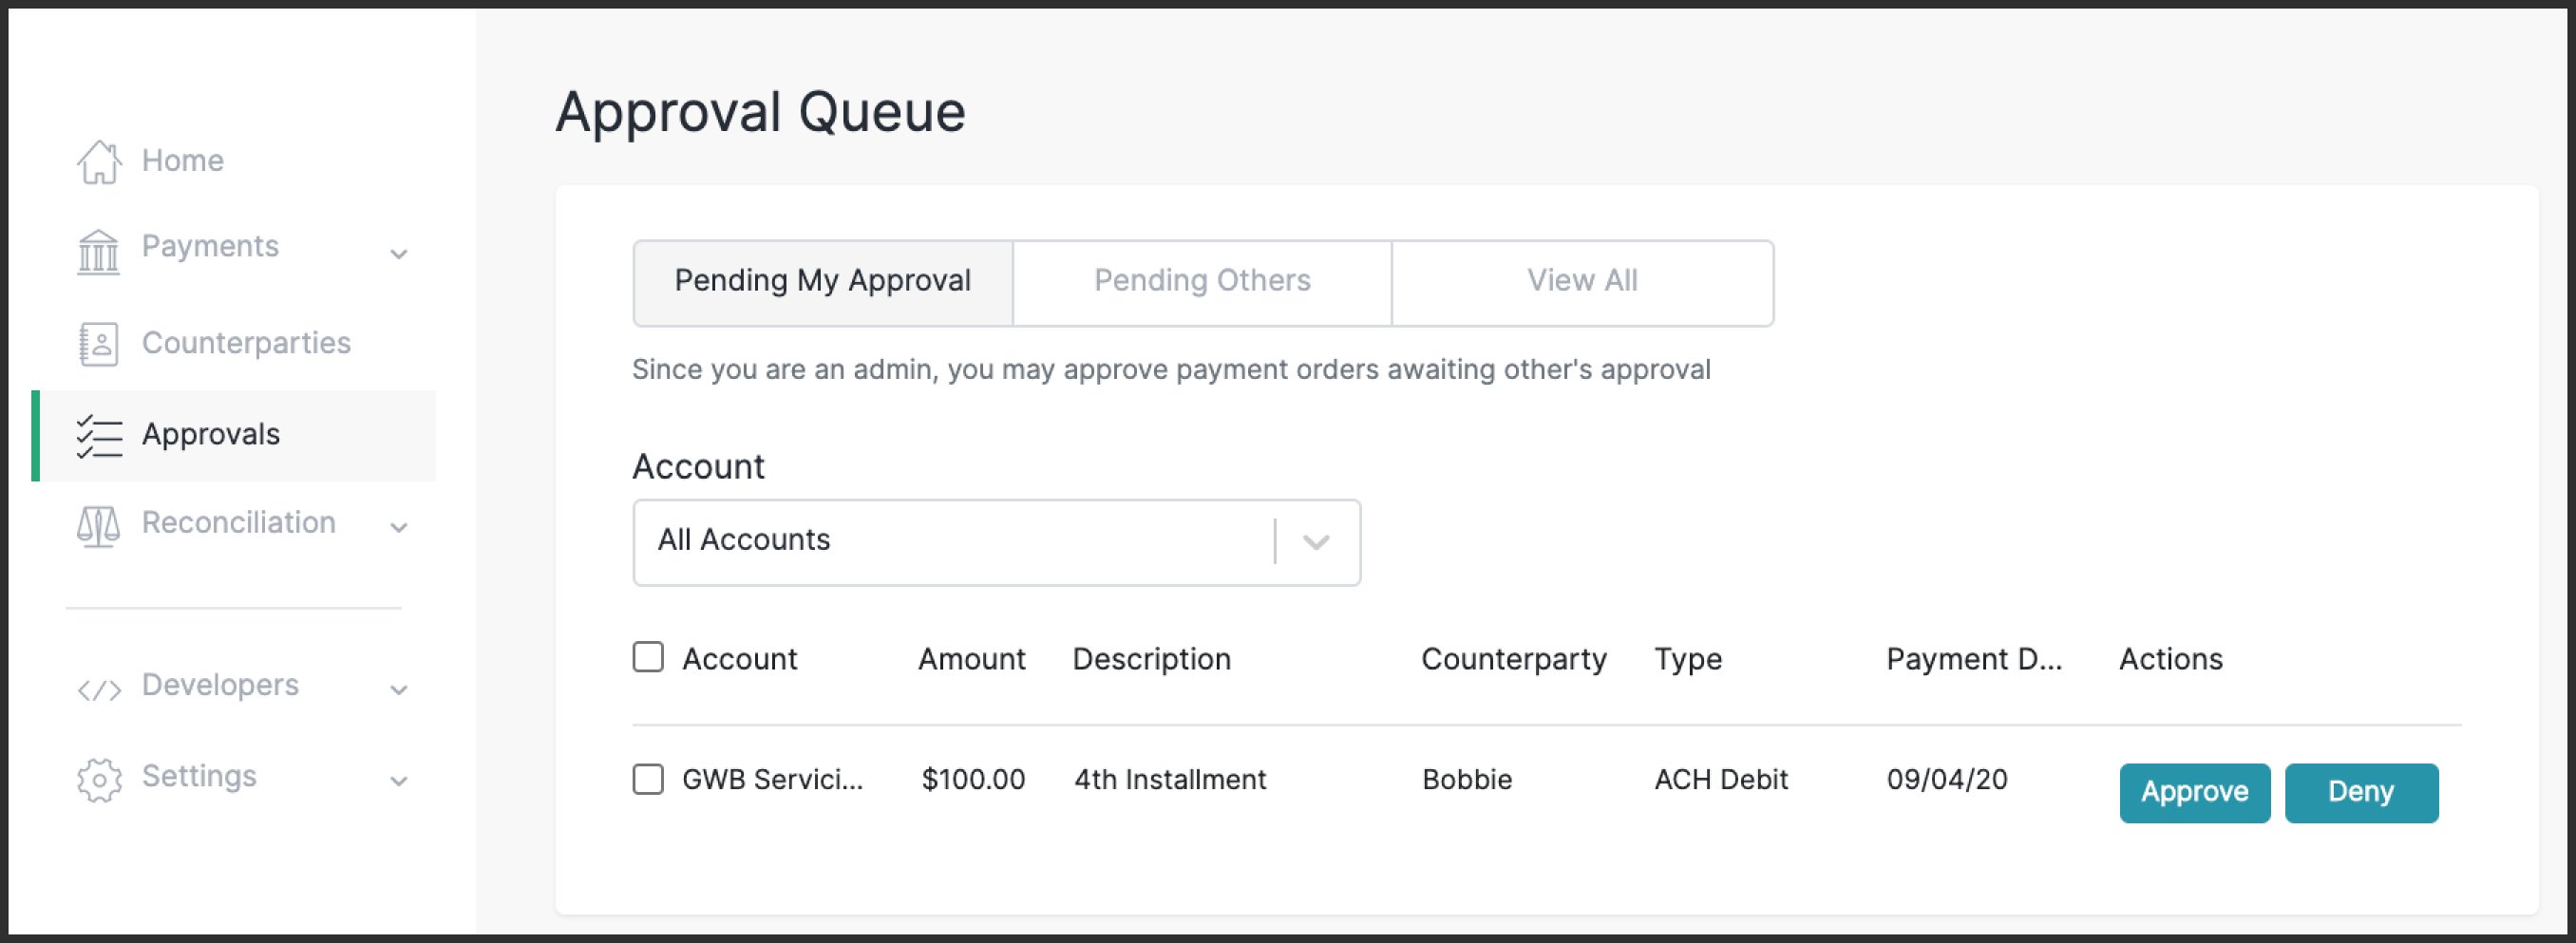 Approval Queue interface